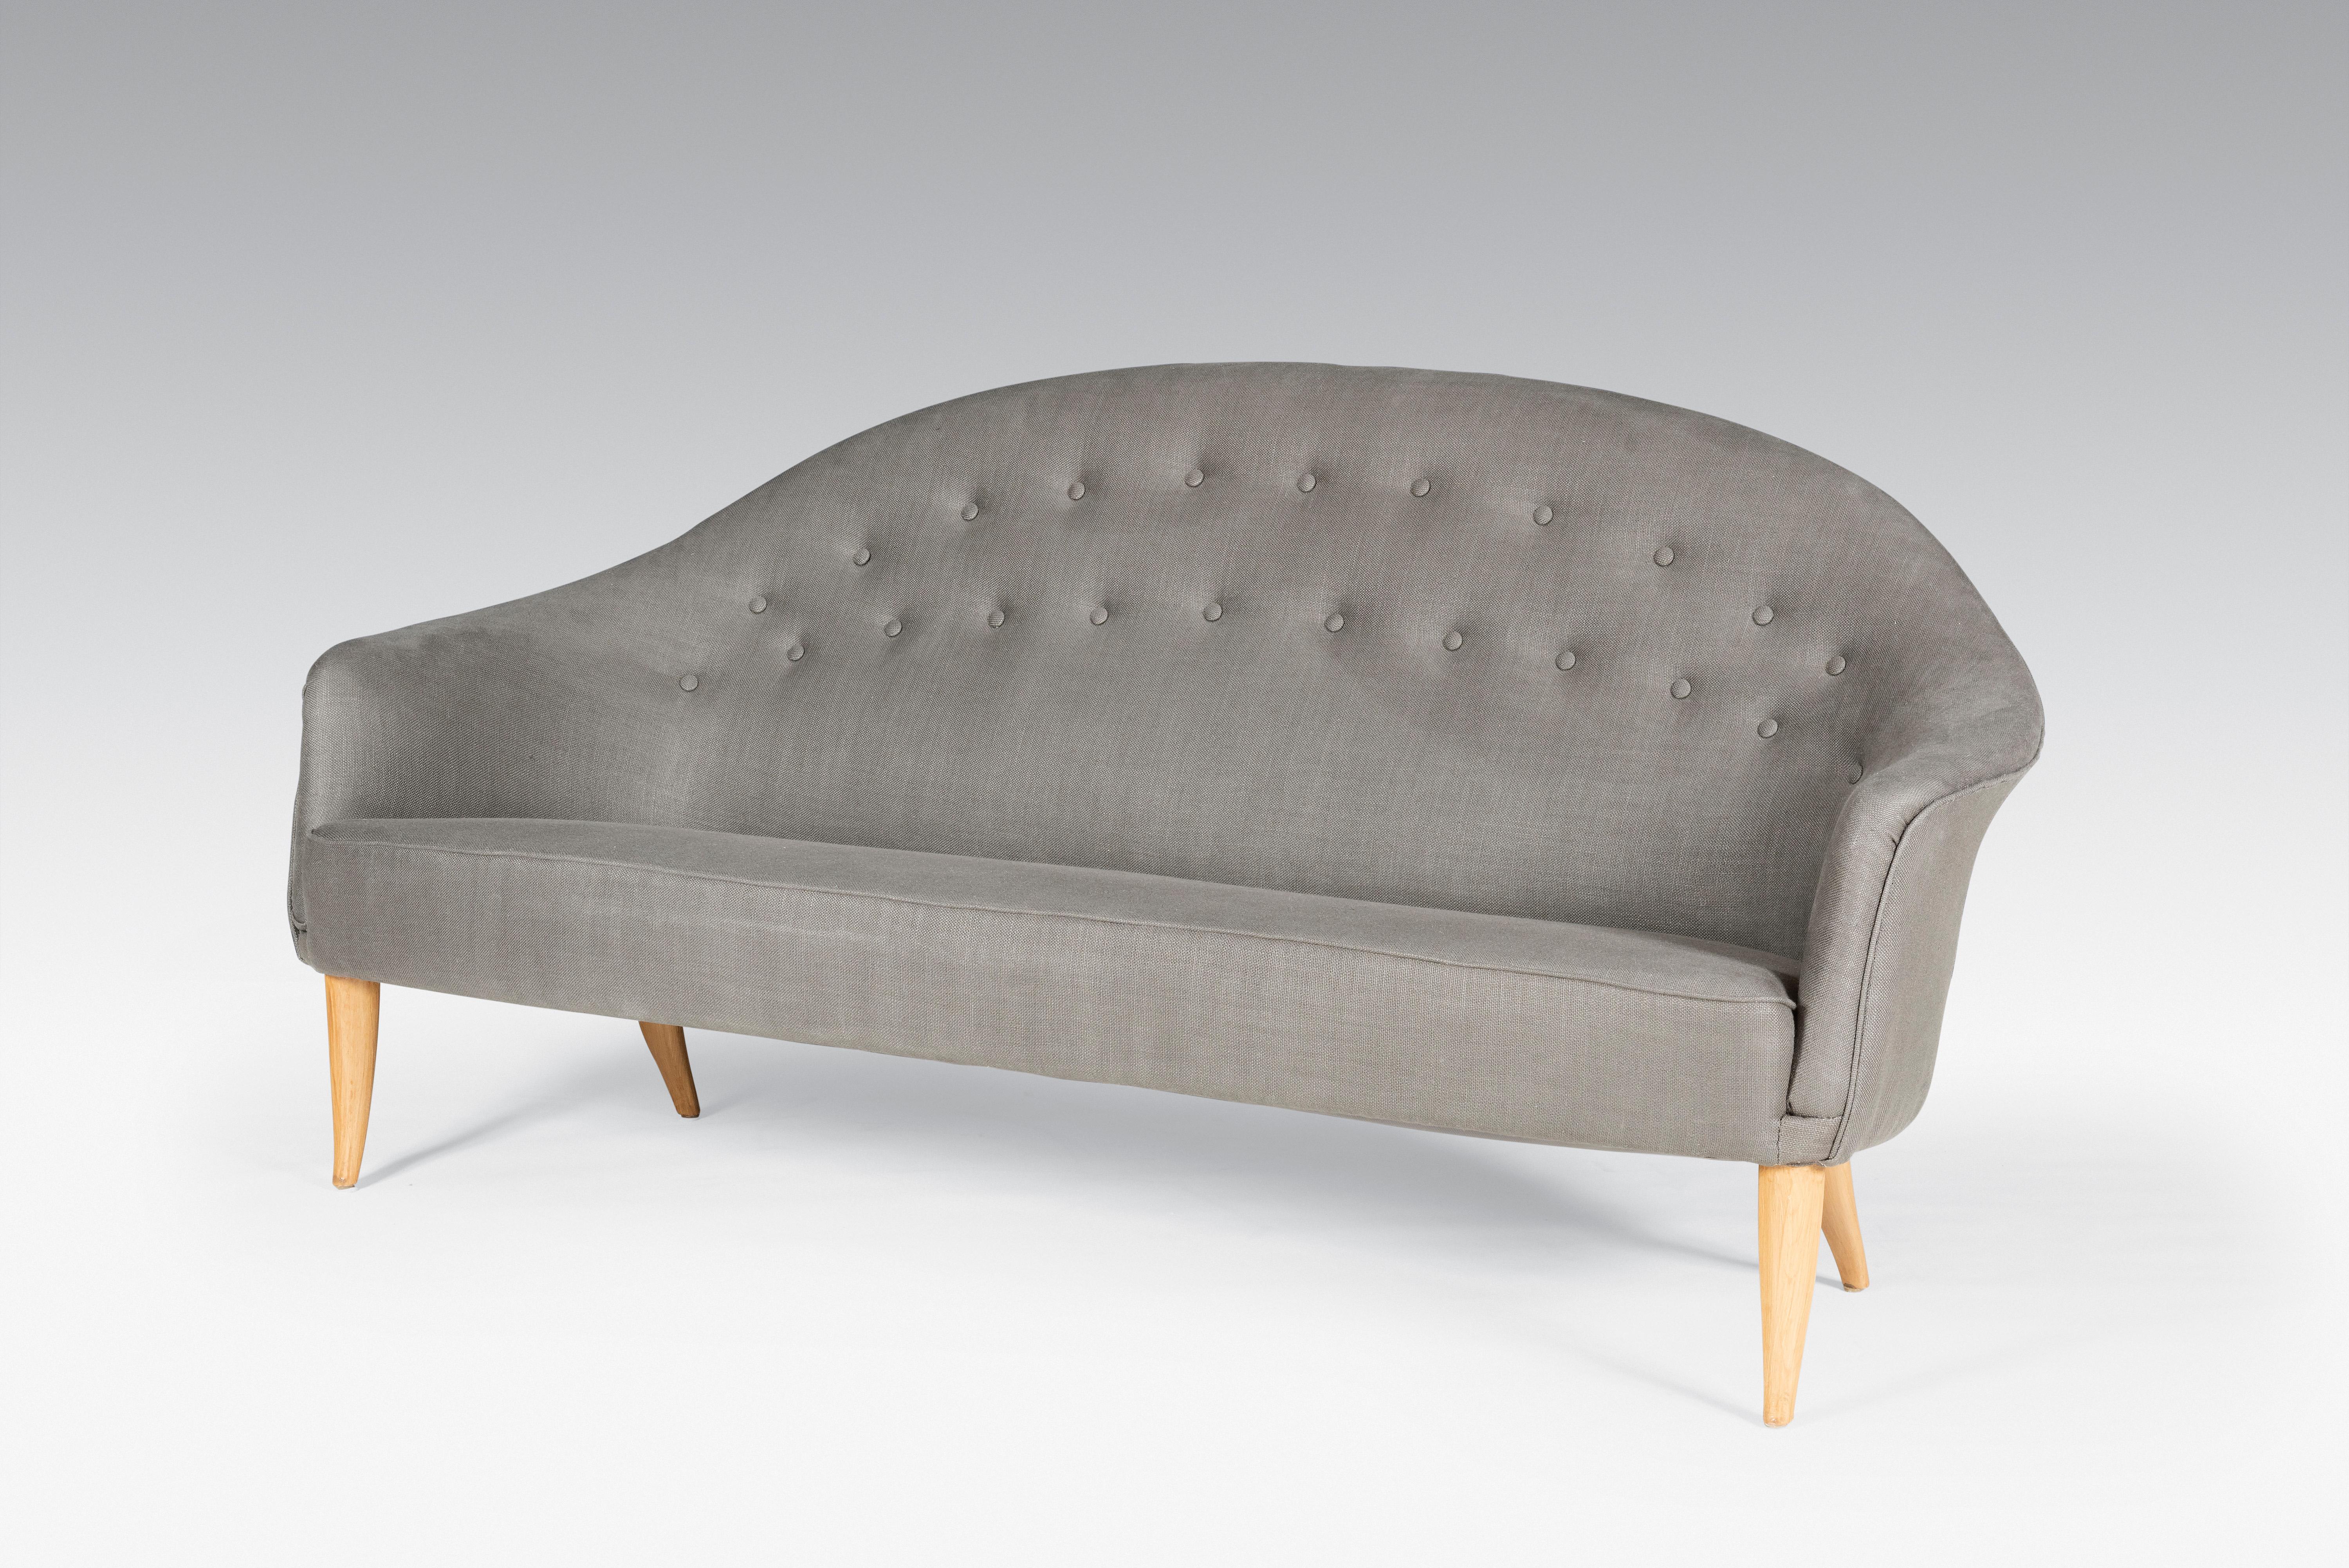 Kerstin Horlin Holmquist is a Swedish designer. This sofa was made for Nordiska Kompaniet in the 1950's. This was part of her Paradise design. This is the larger version. It features a soft curved line of the back and tapered and curved beech legs.